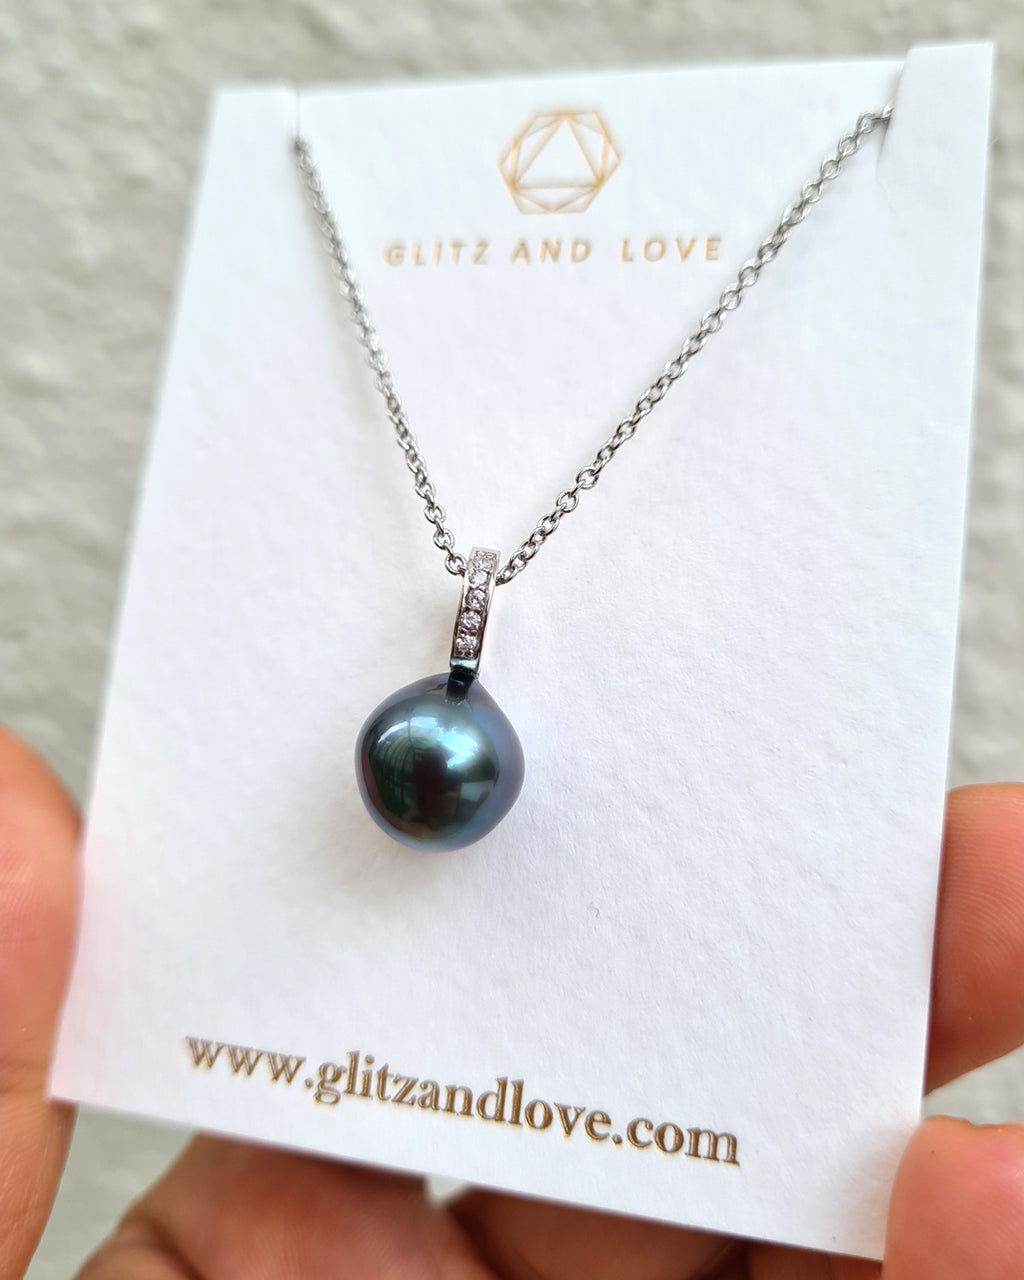 Blue Tahitian Pearl Pendant Necklace - 10mm+ | Timeless Pearl Jewelry For Wedding and Everyday